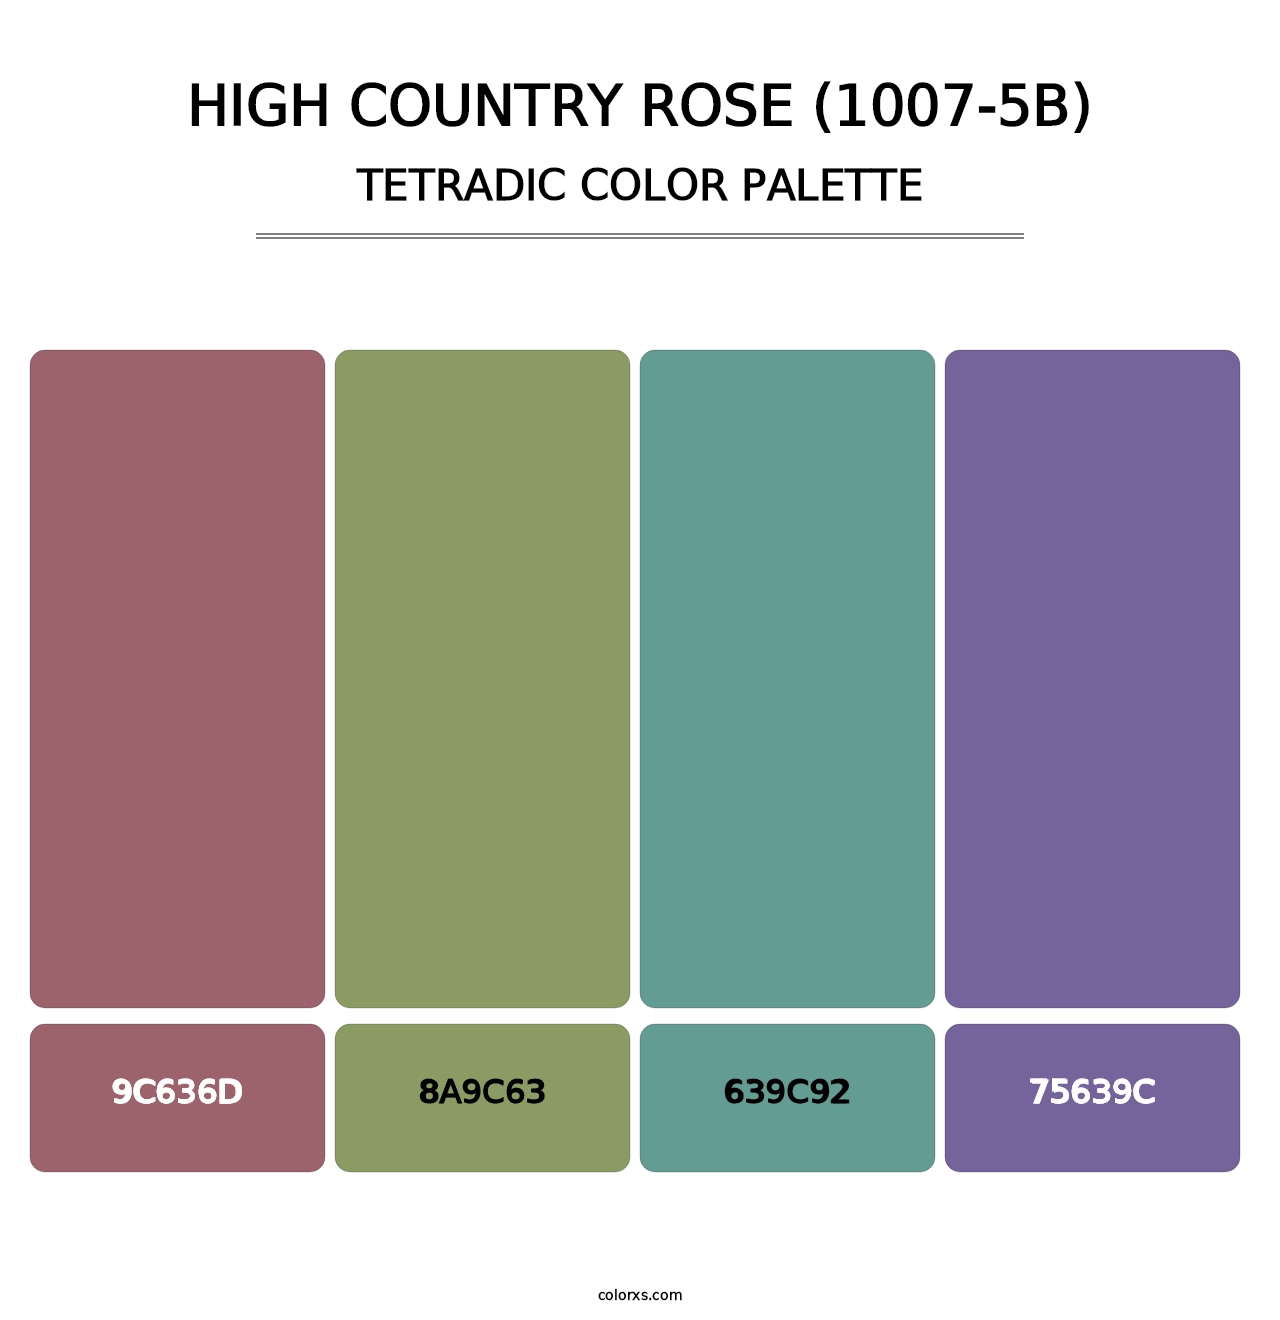 High Country Rose (1007-5B) - Tetradic Color Palette